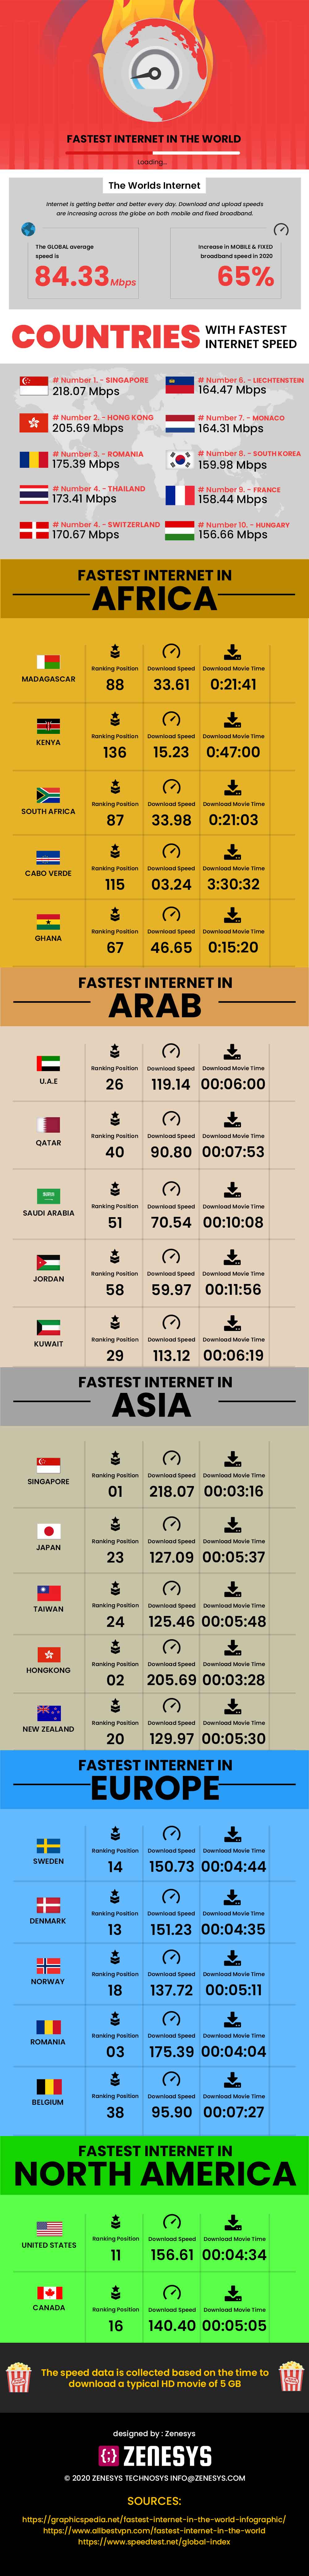 Countries With the Fastest Internet Speeds